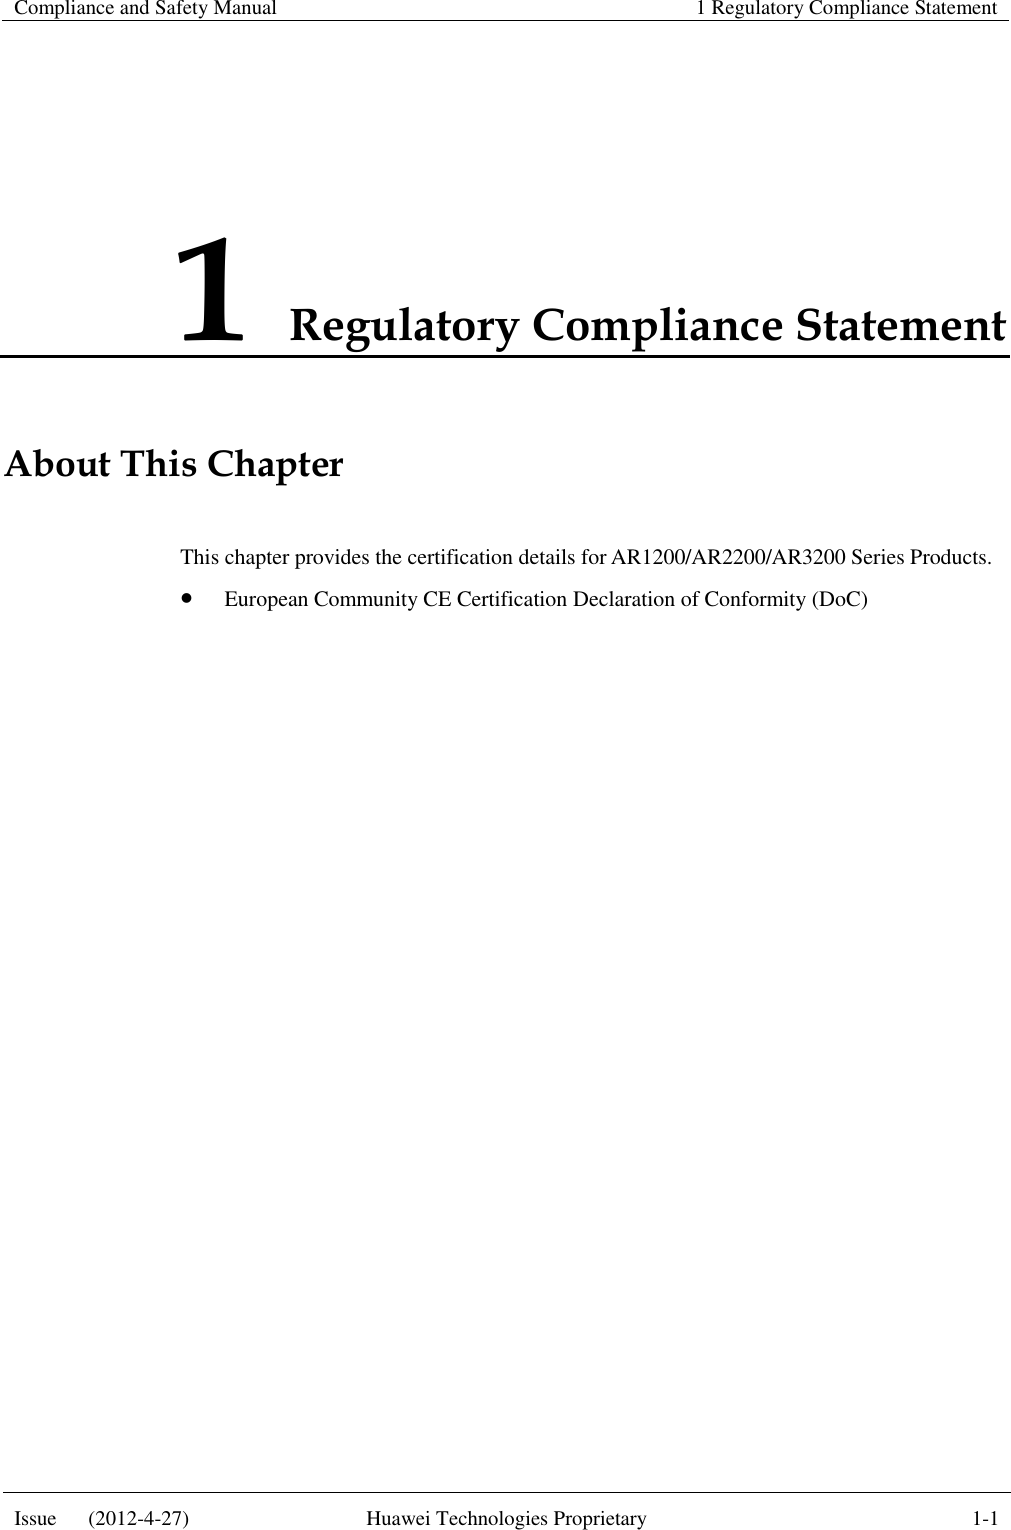 Compliance and Safety Manual 1 Regulatory Compliance Statement  Issue      (2012-4-27) Huawei Technologies Proprietary 1-1  1 Regulatory Compliance Statement About This Chapter This chapter provides the certification details for AR1200/AR2200/AR3200 Series Products.  European Community CE Certification Declaration of Conformity (DoC) 